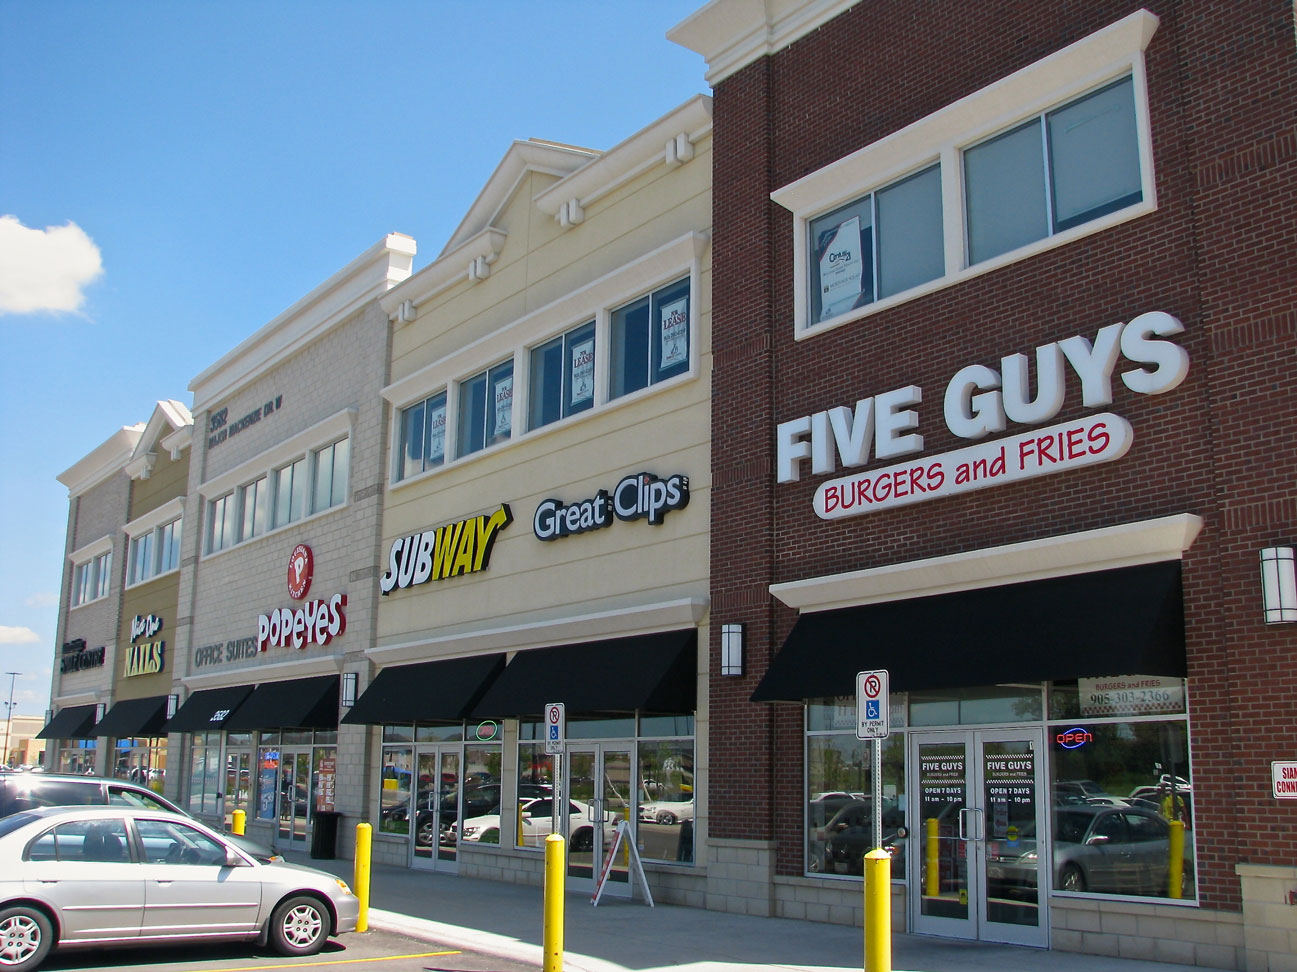 Five guys, Subway in a mall